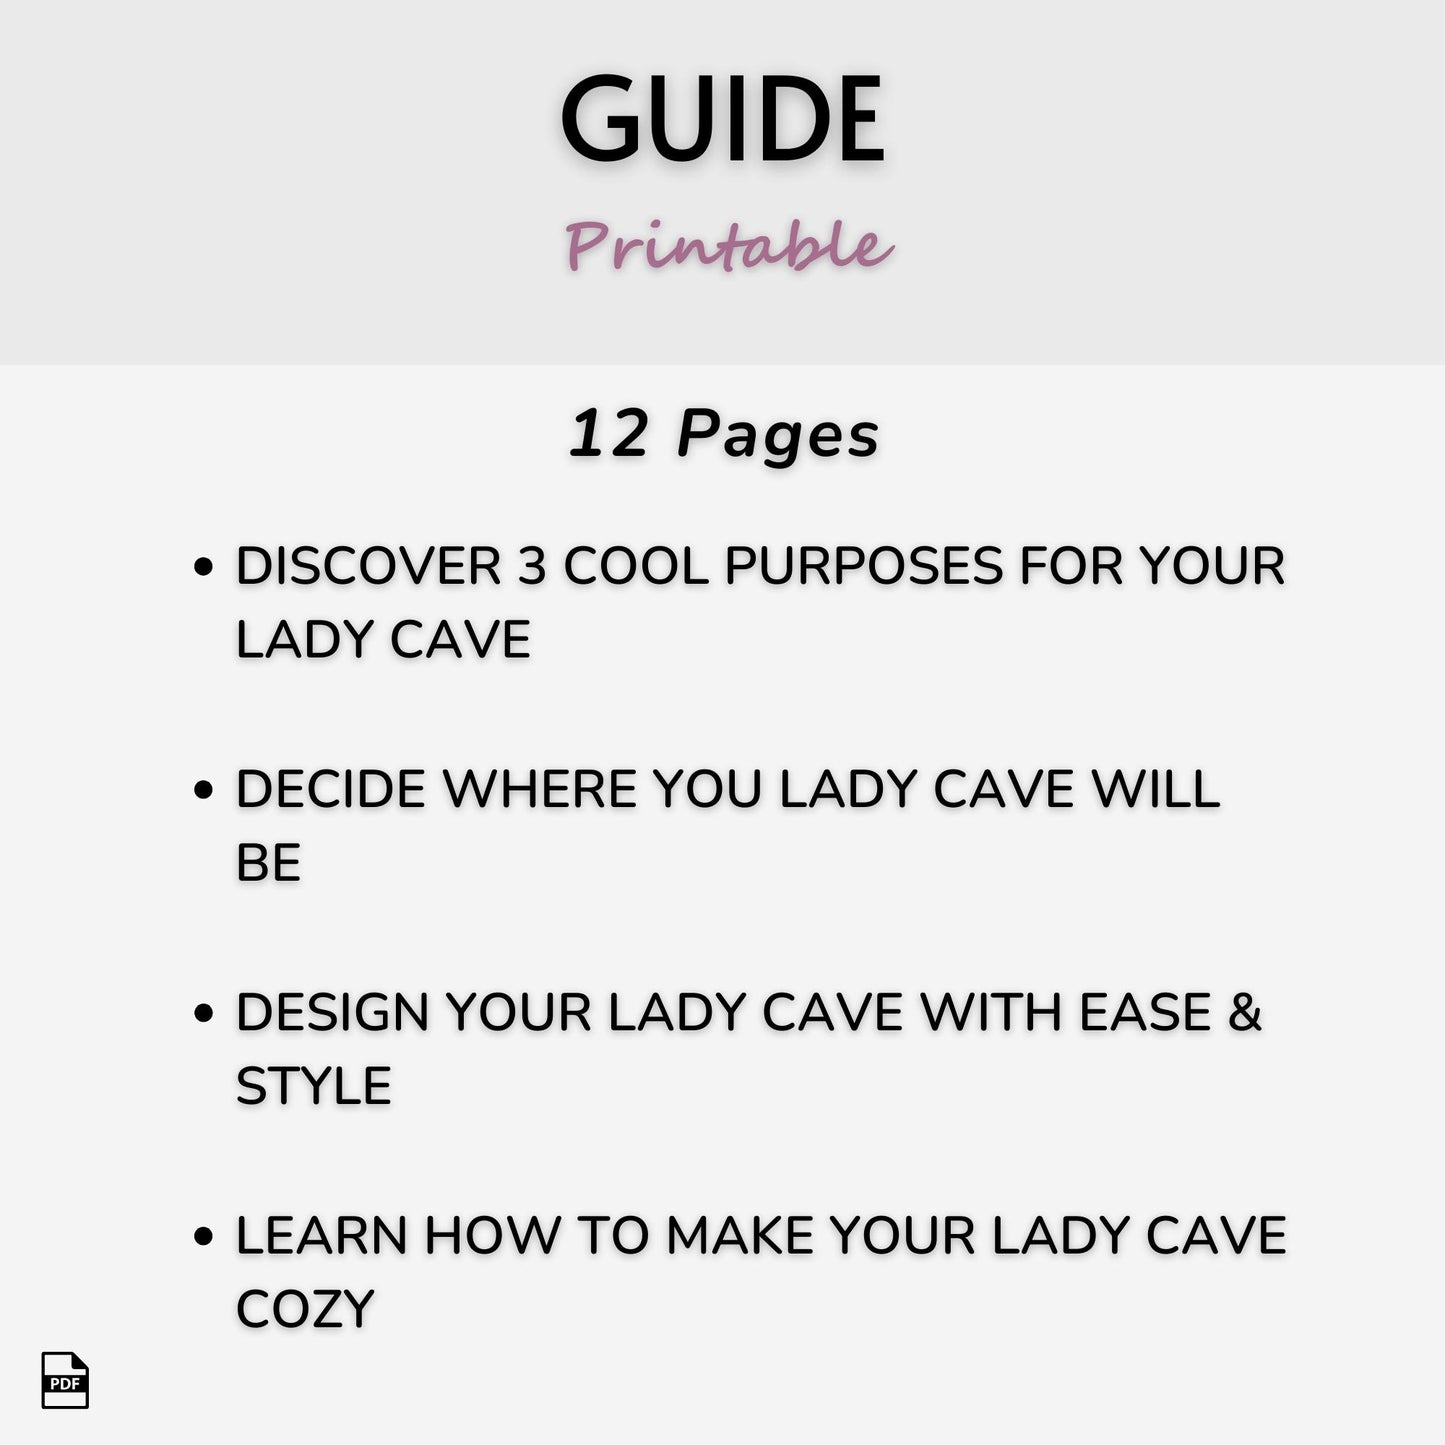 Create Your Personalized Lady Cave